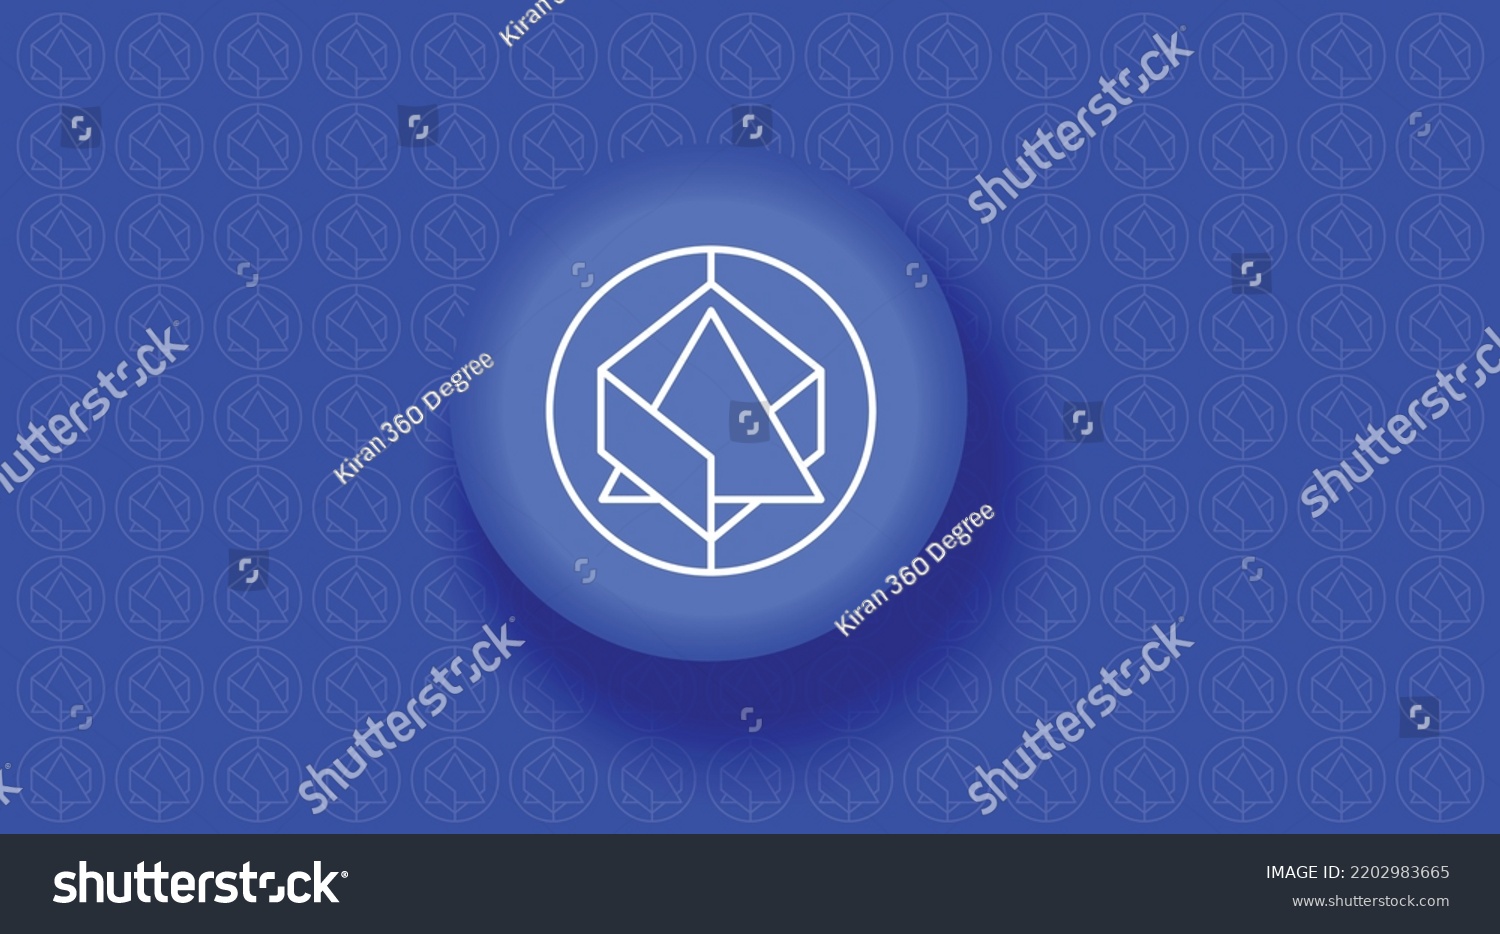 SVG of Alchemix ALCX cryptocurrency coin logo and symbol vector illustration. Virtual currency token 3D design svg